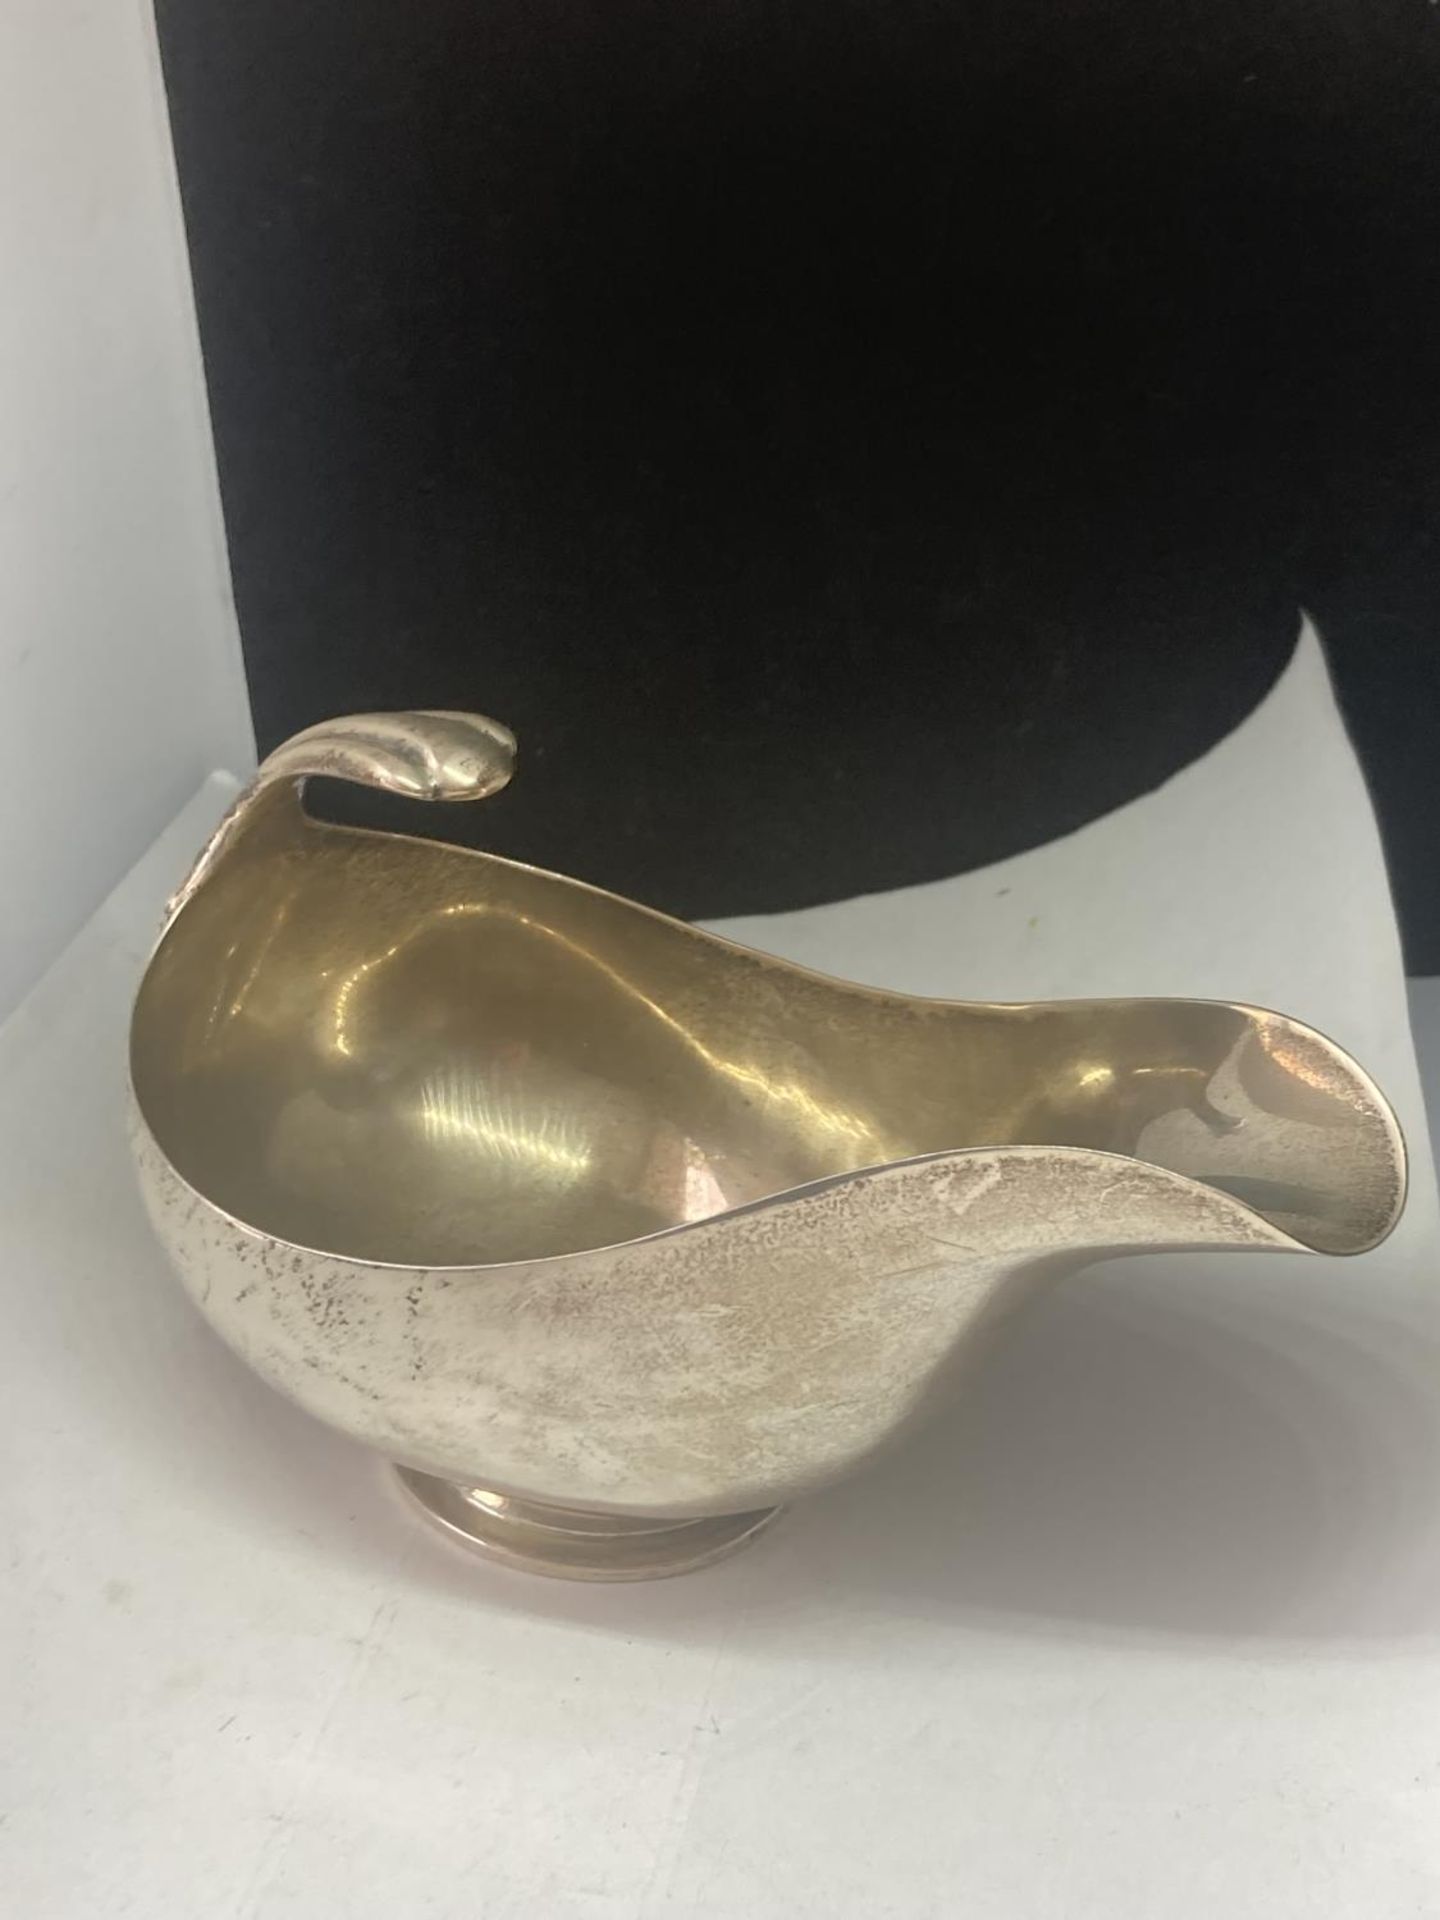 A HALLMARKED CHESTER SILVER GRAVY BOAT GROSS WEIGHT 200.5 GRAMS - Image 4 of 8